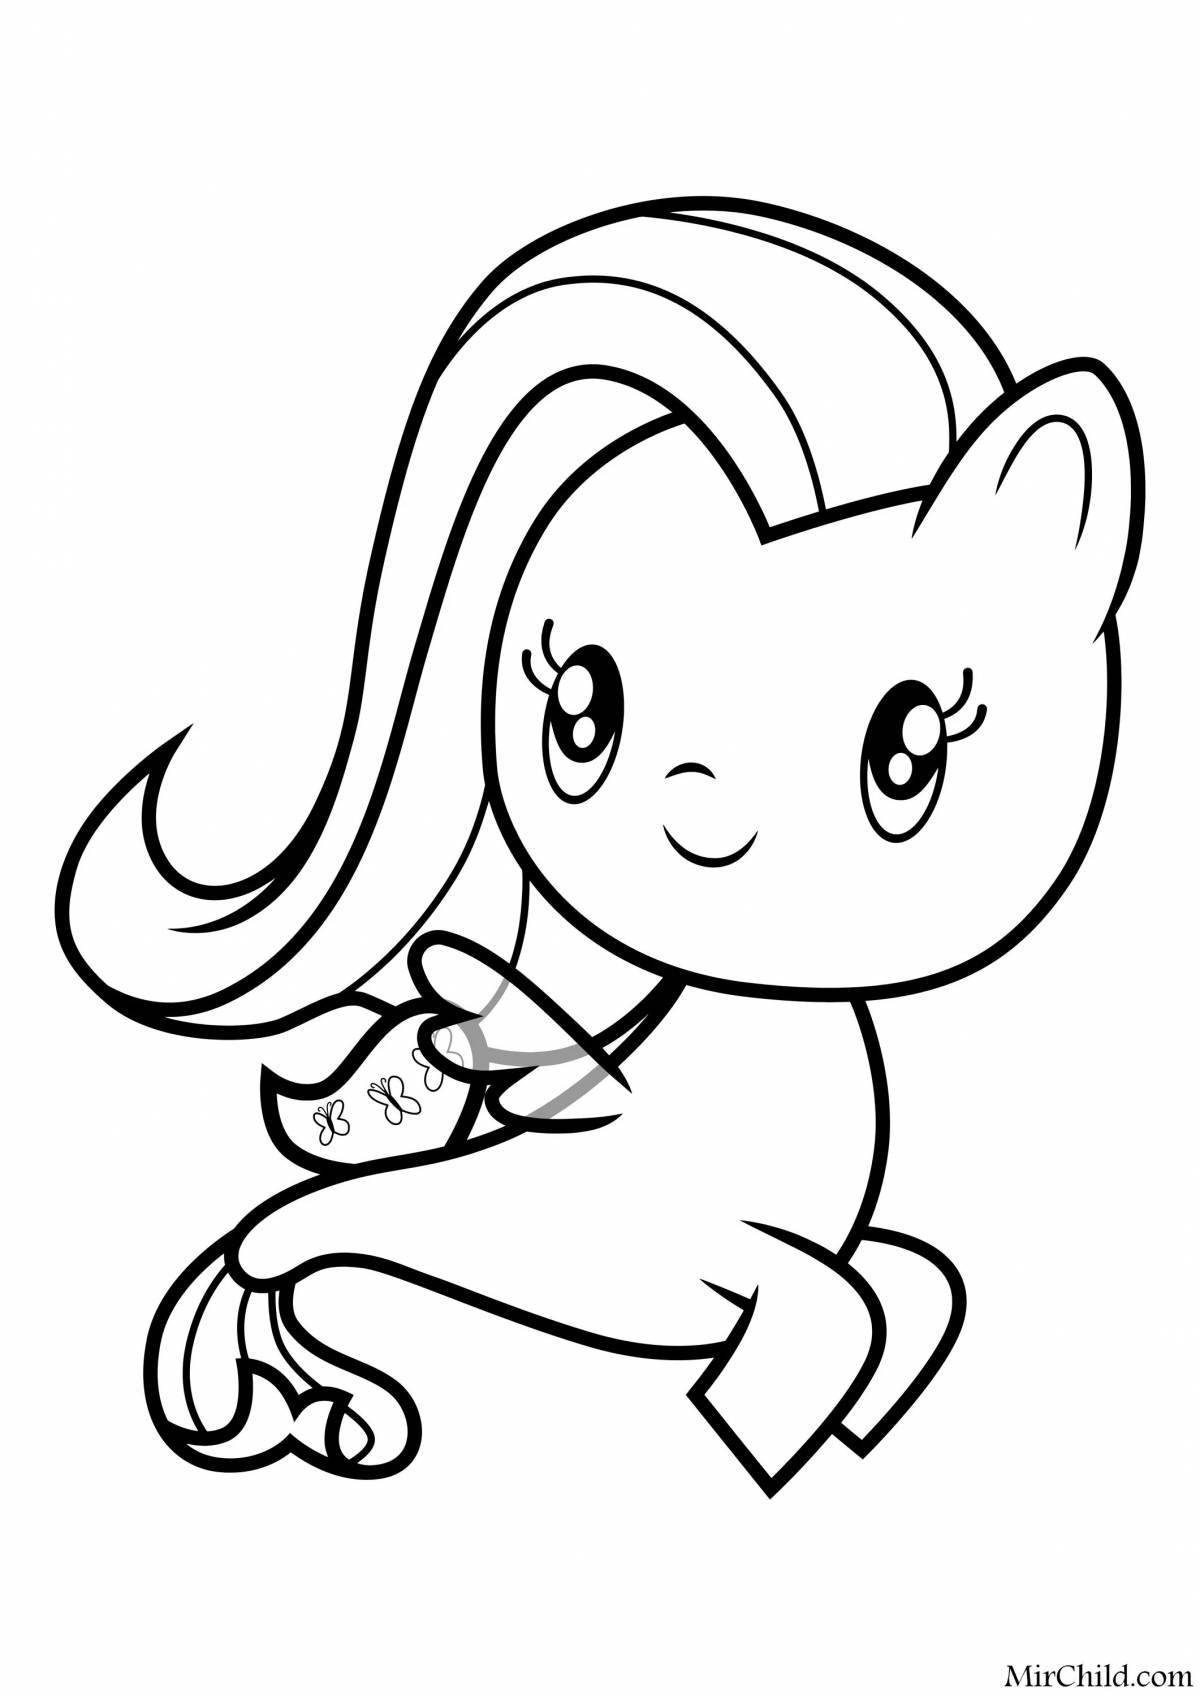 Radiant pony coloring book for kids